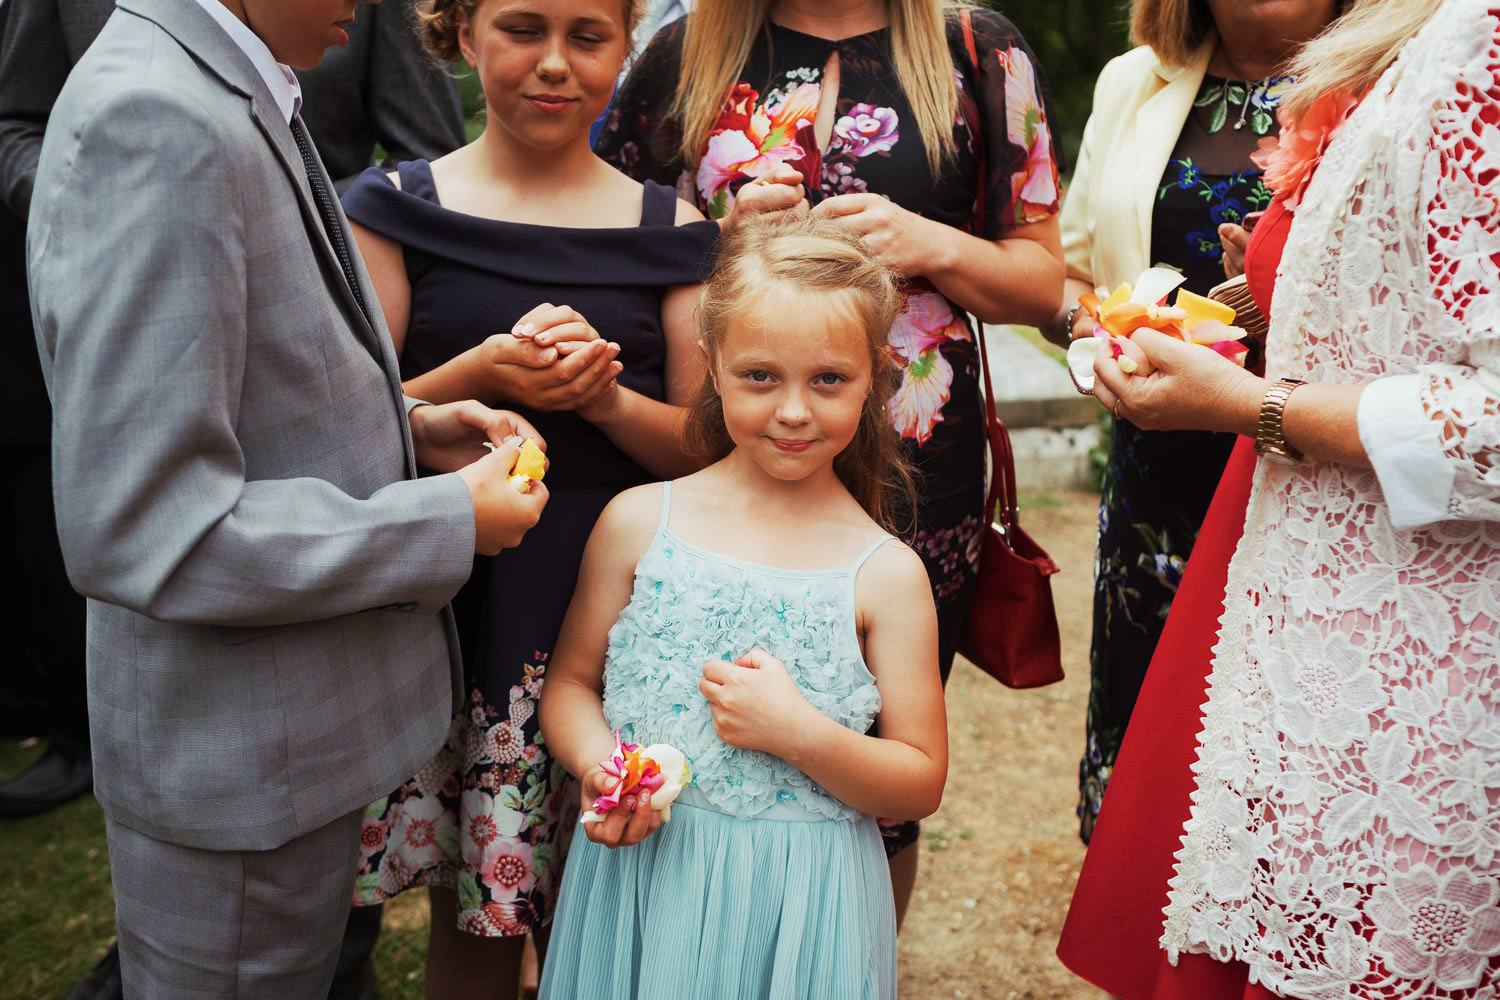 A young girl holding petals for confetti throwing, looking at the camera.